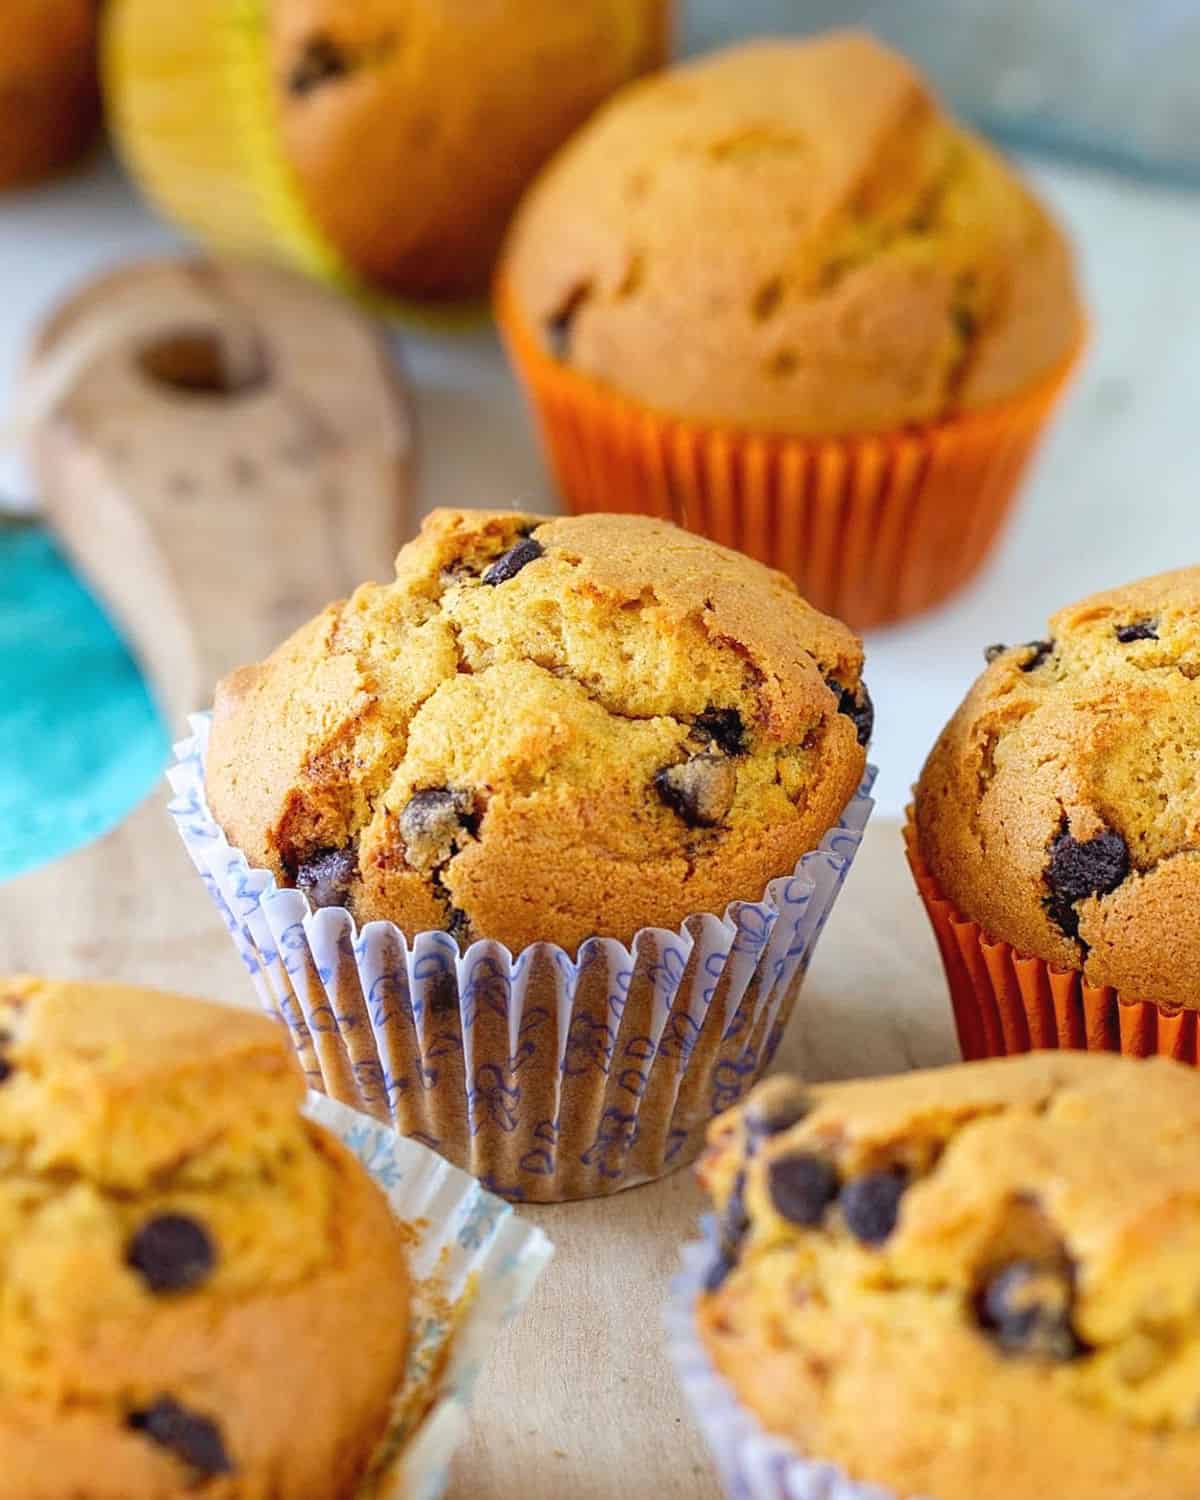 Several chocolate chip pumpkin muffins on a light wooden board, colorful paper cups.